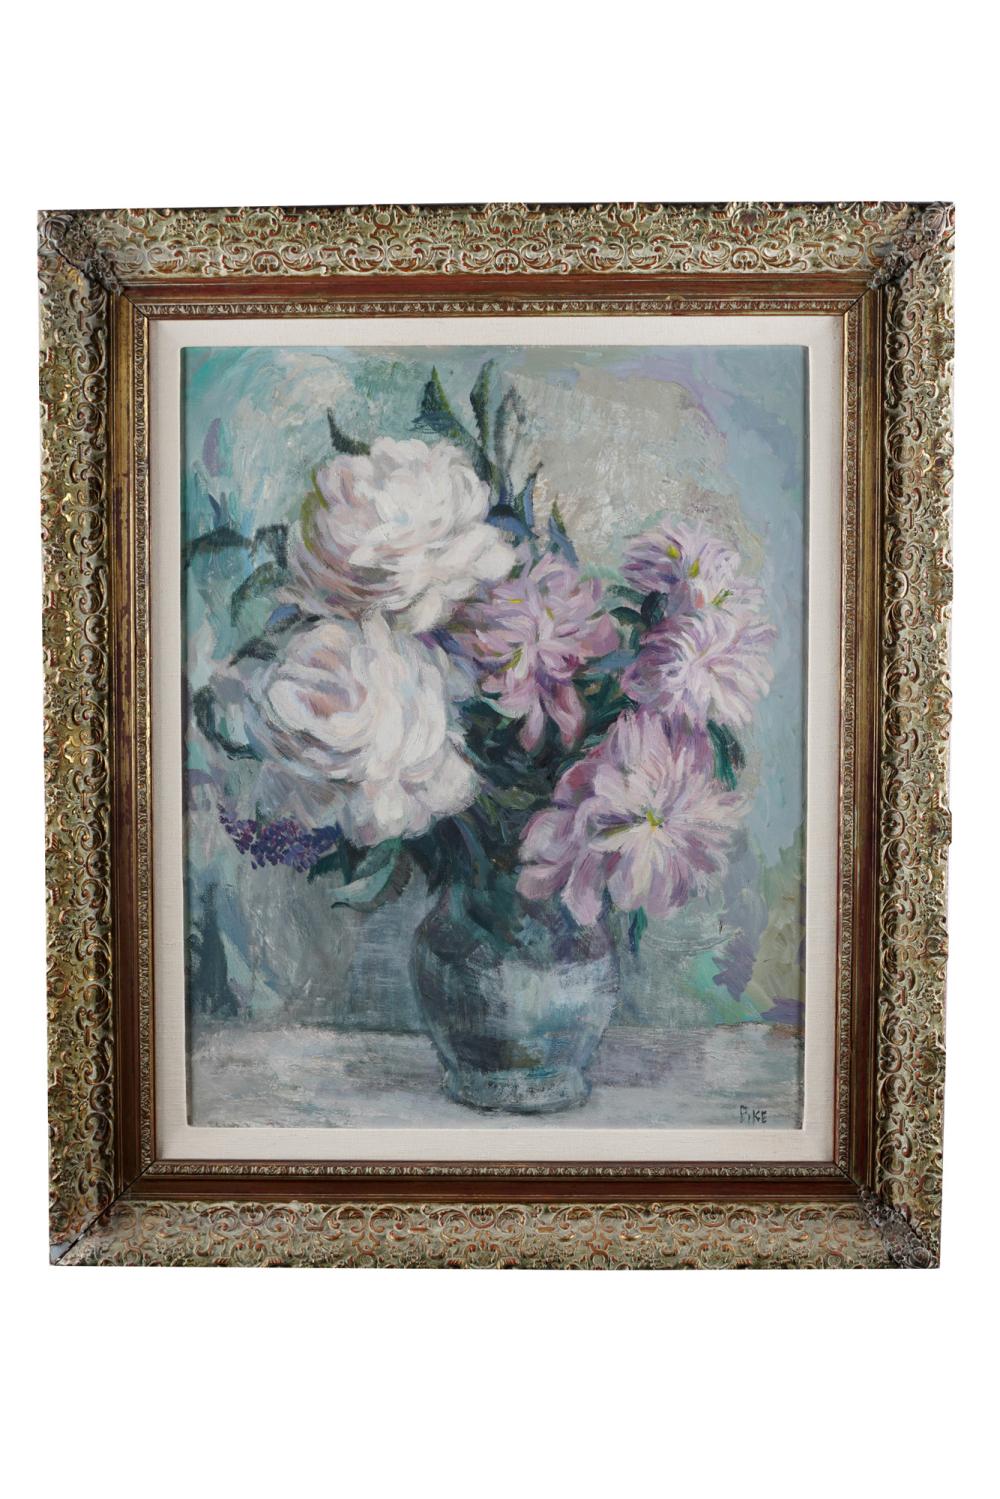 MARION PIKE: "PEONIES"oil on canvas